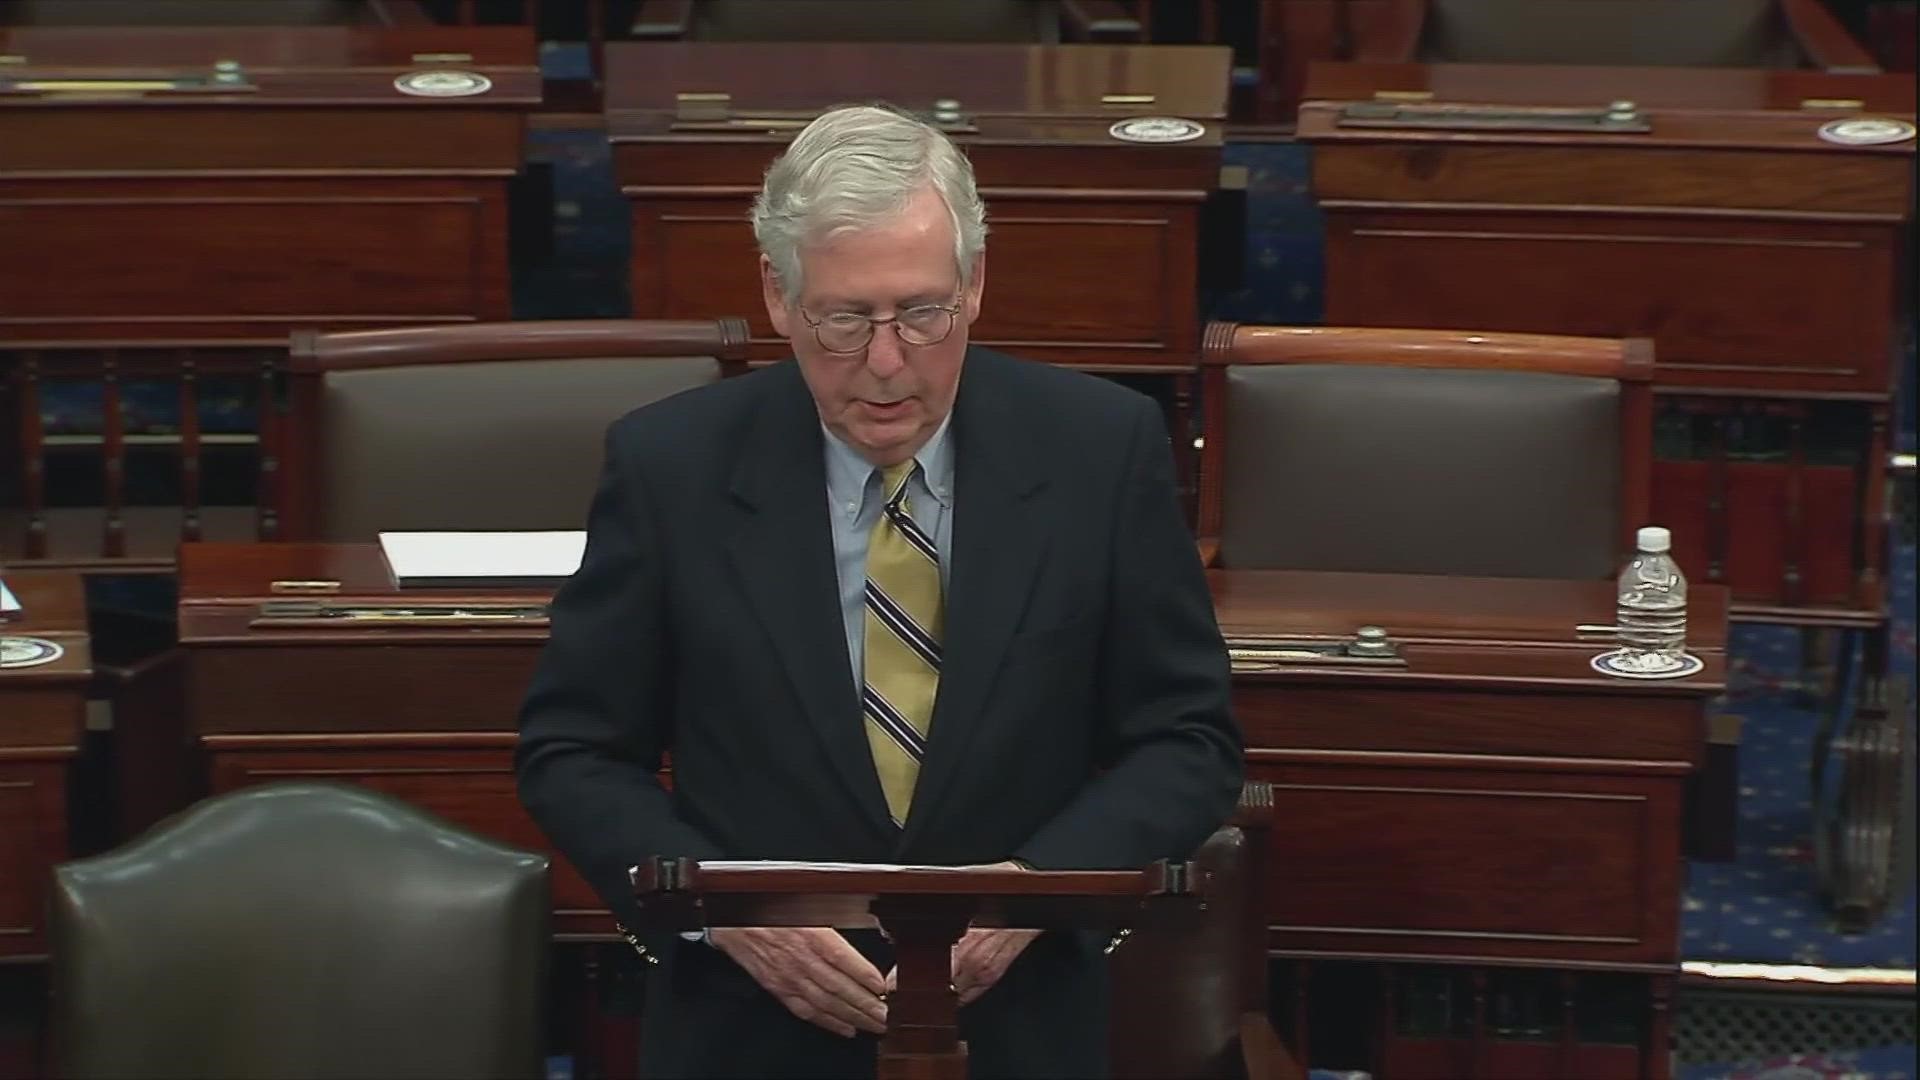 Just minutes after voting to acquit Donald Trump in his 2nd impeachment trial, Mitch McConnell called Trump 'practically and morally responsible' for Capitol riot.